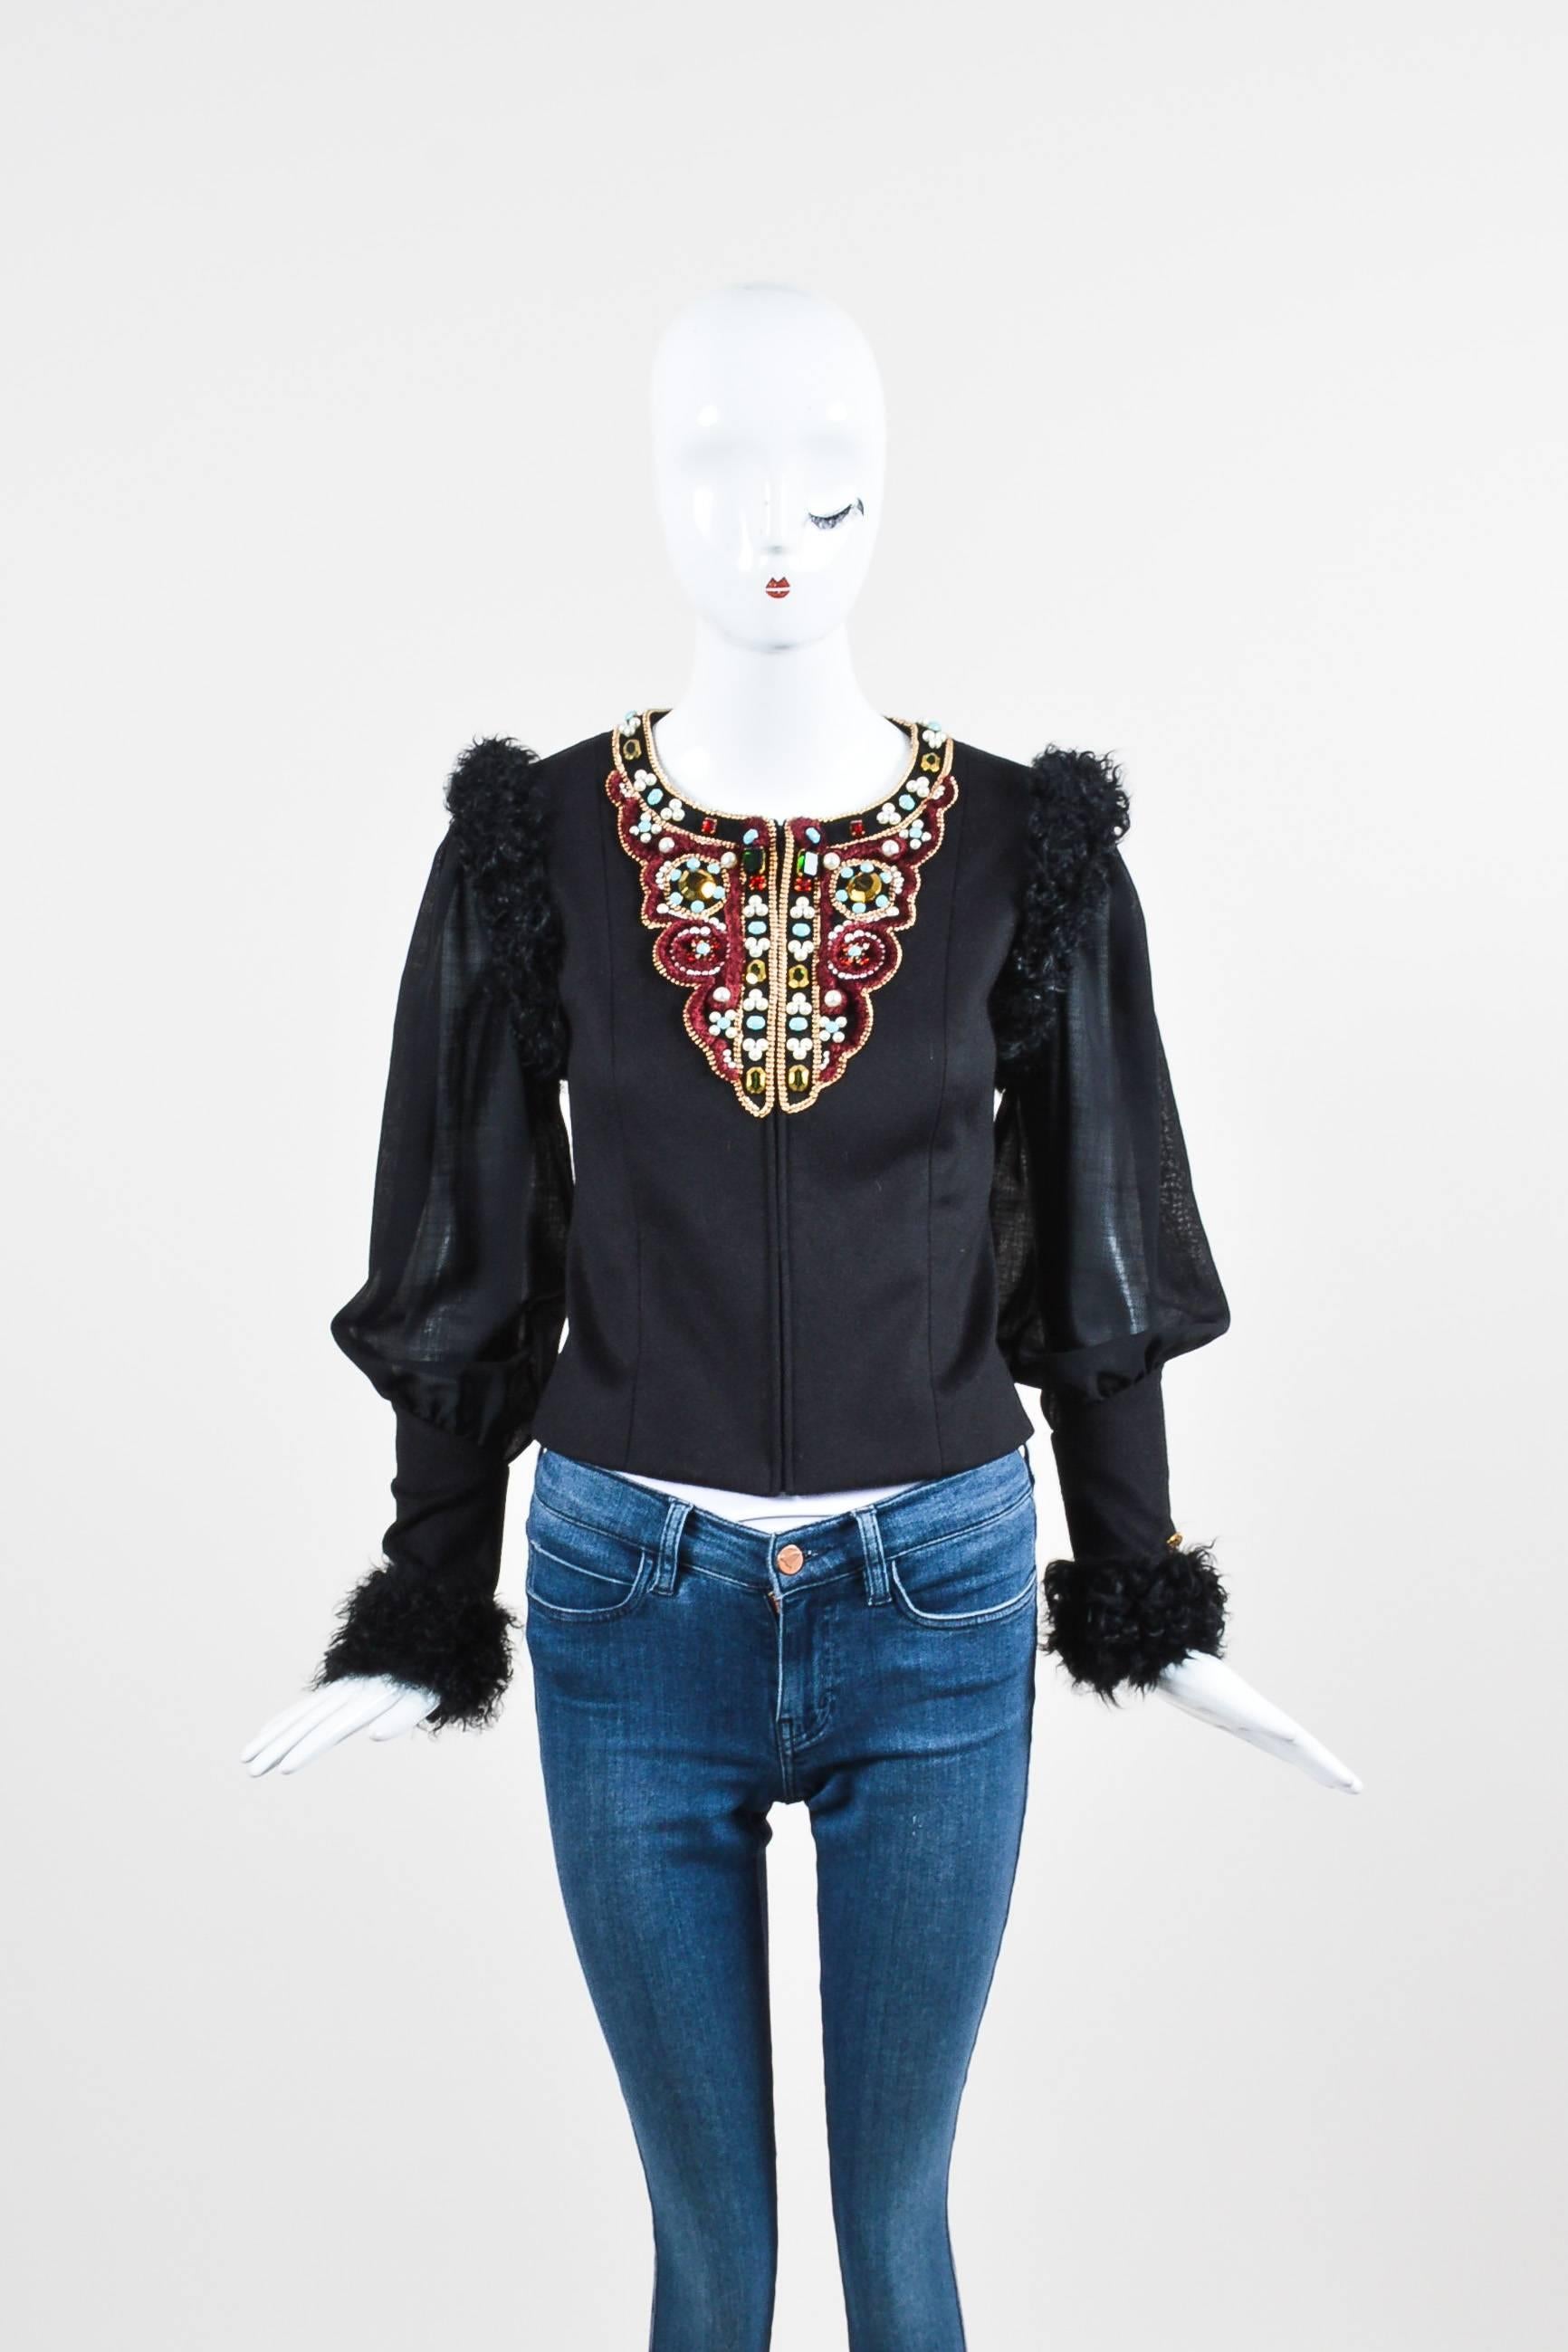 Make a bold and elegant statement in this embellished jacket by Chanel. Soft and warm cashmere body with wool panels at the sleeves and lamb fur trim throughout. Multicolored gems and faux pearls at the front neckline. Pops of burgundy red,